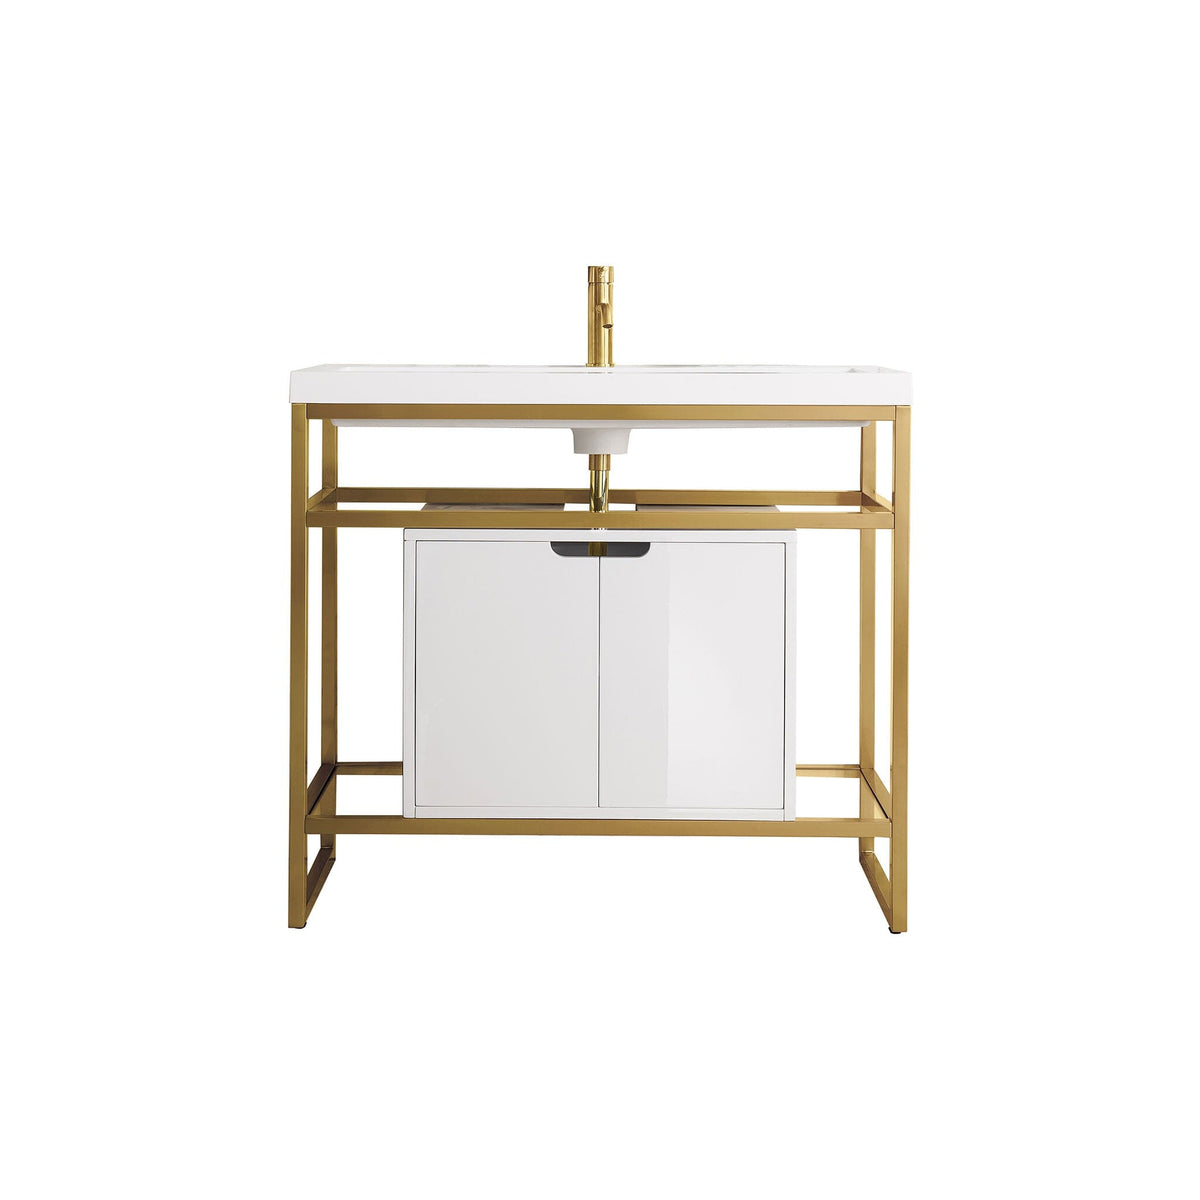 39.5" Boston Single Sink Console, Radiant Gold w/ Glossy White Storage Cabinet, White Glossy Resin Countertop